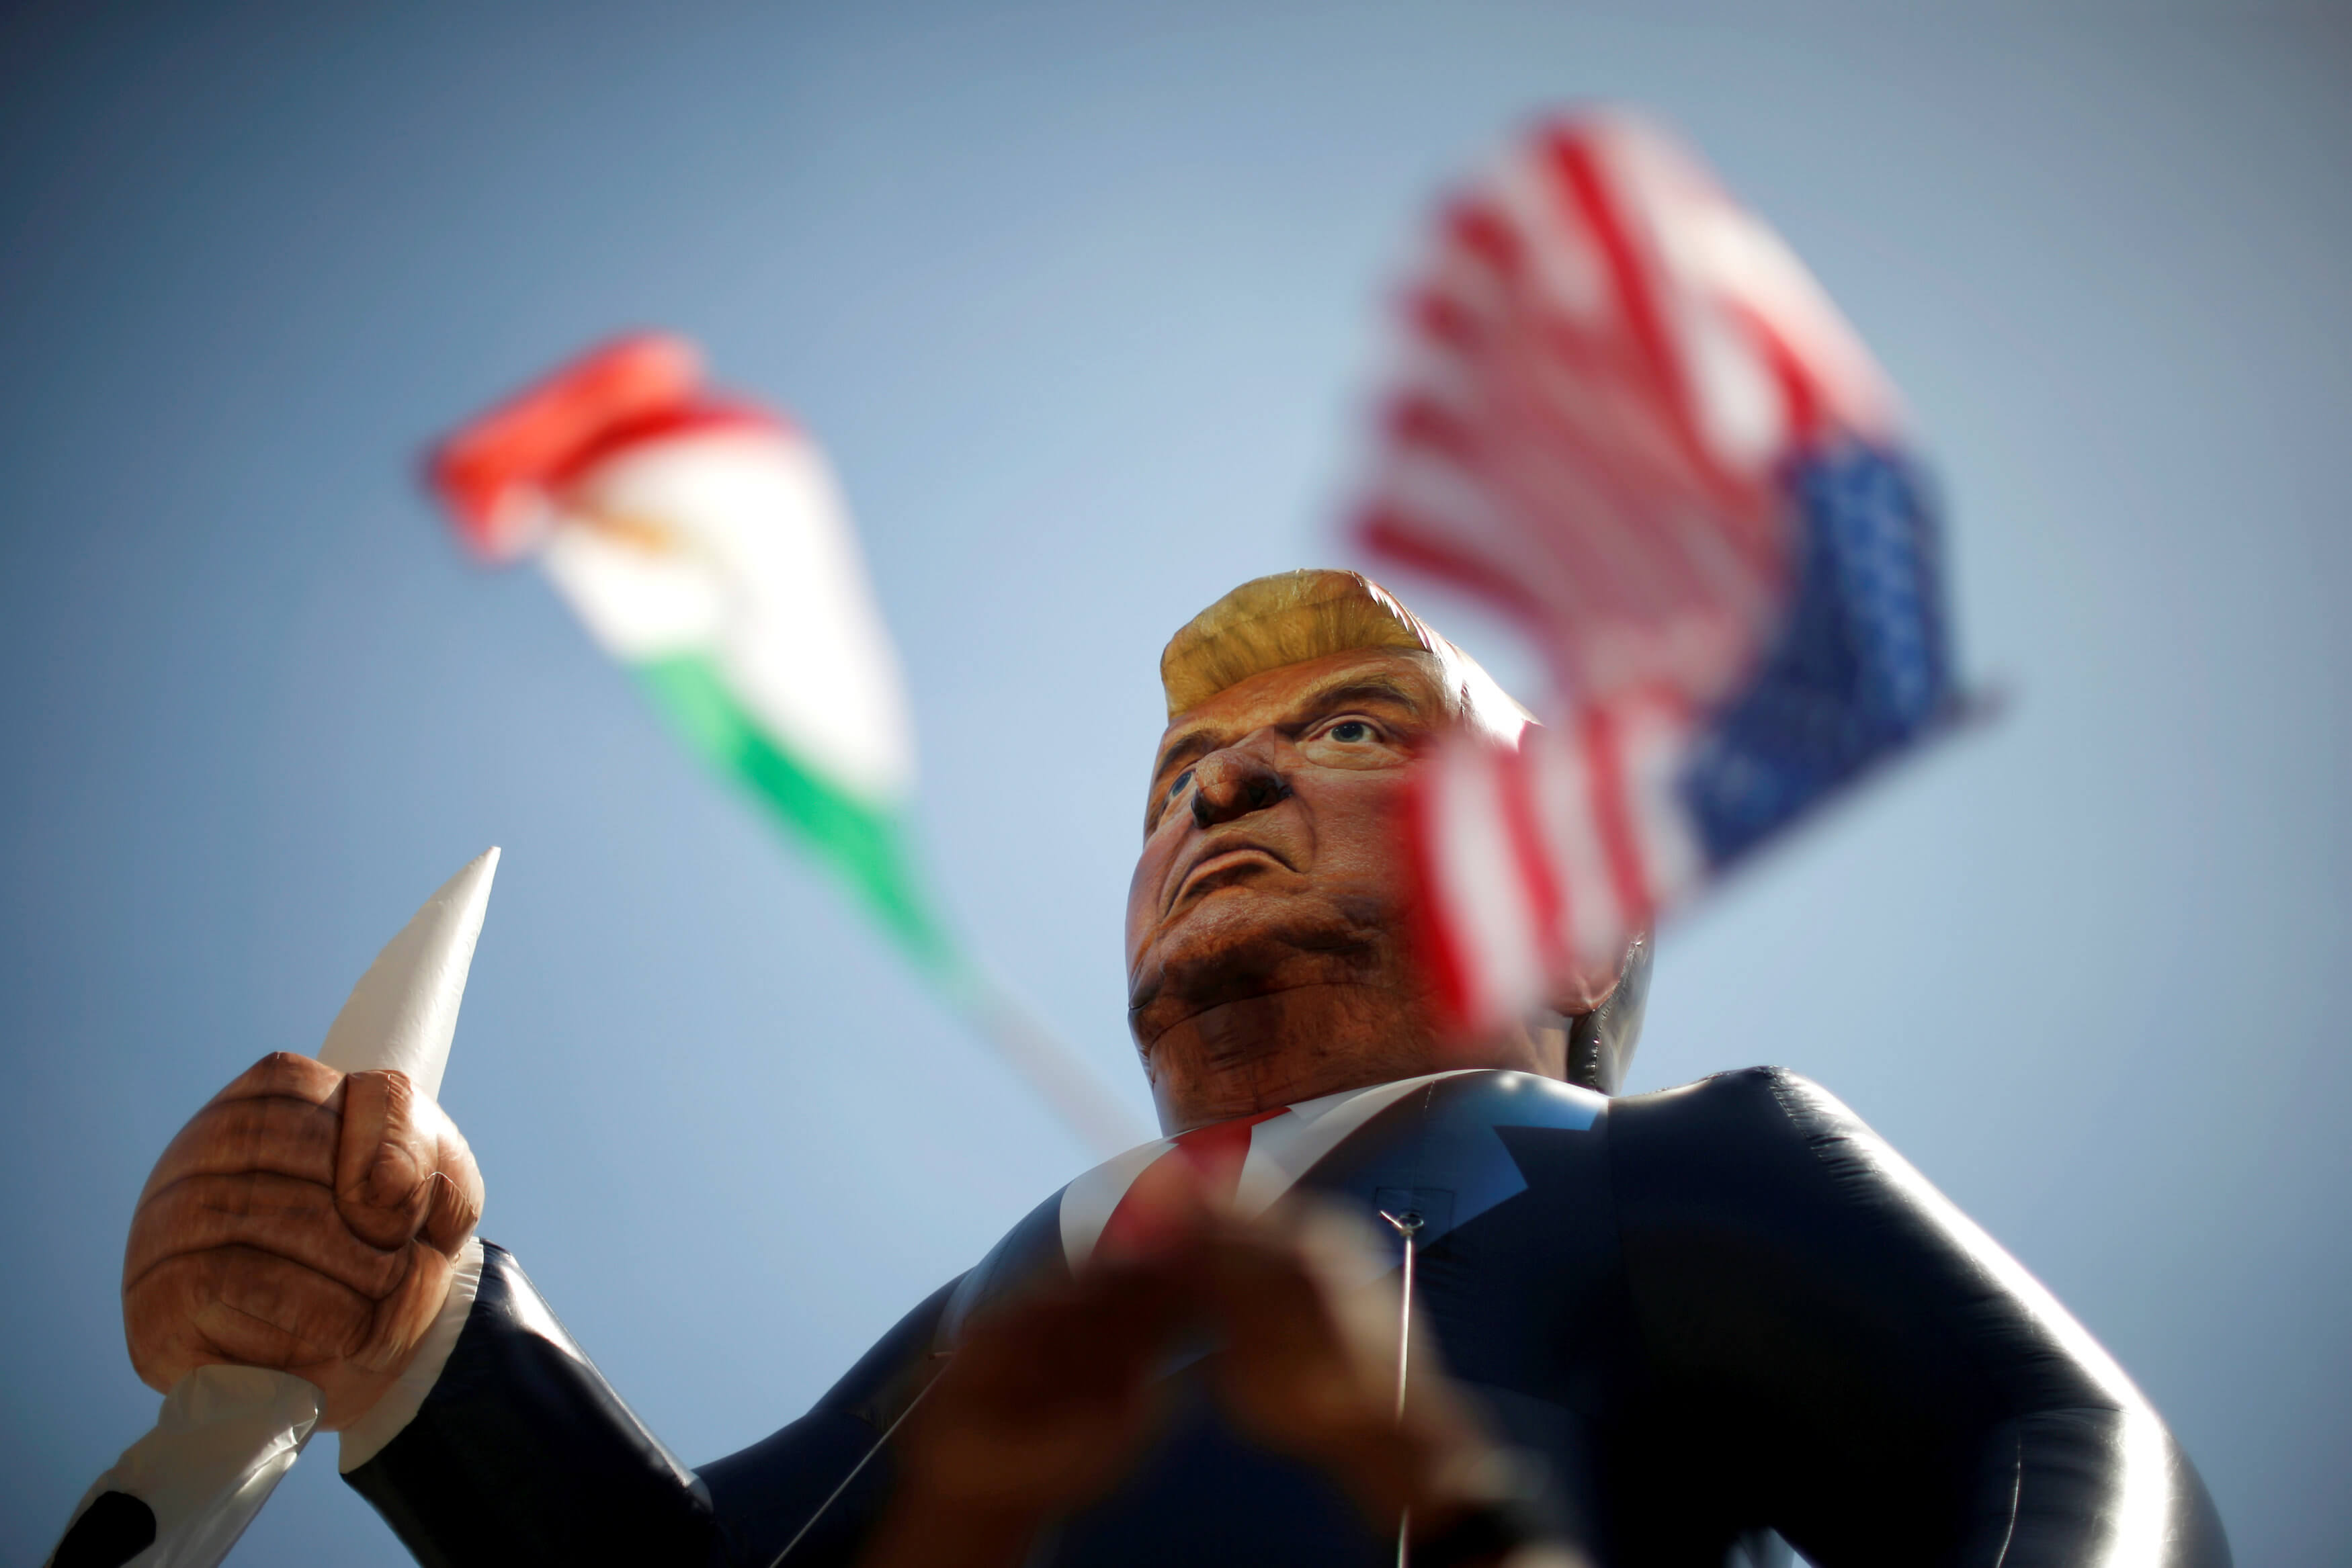 Mexican and U.S. flags are seen under an inflatable effigy of Republican presidential candidate Donald Trump during a march at an immigrant rights May Day rally in Los Angeles, California, U.S., May 1, 2016. REUTERS/Lucy Nicholson